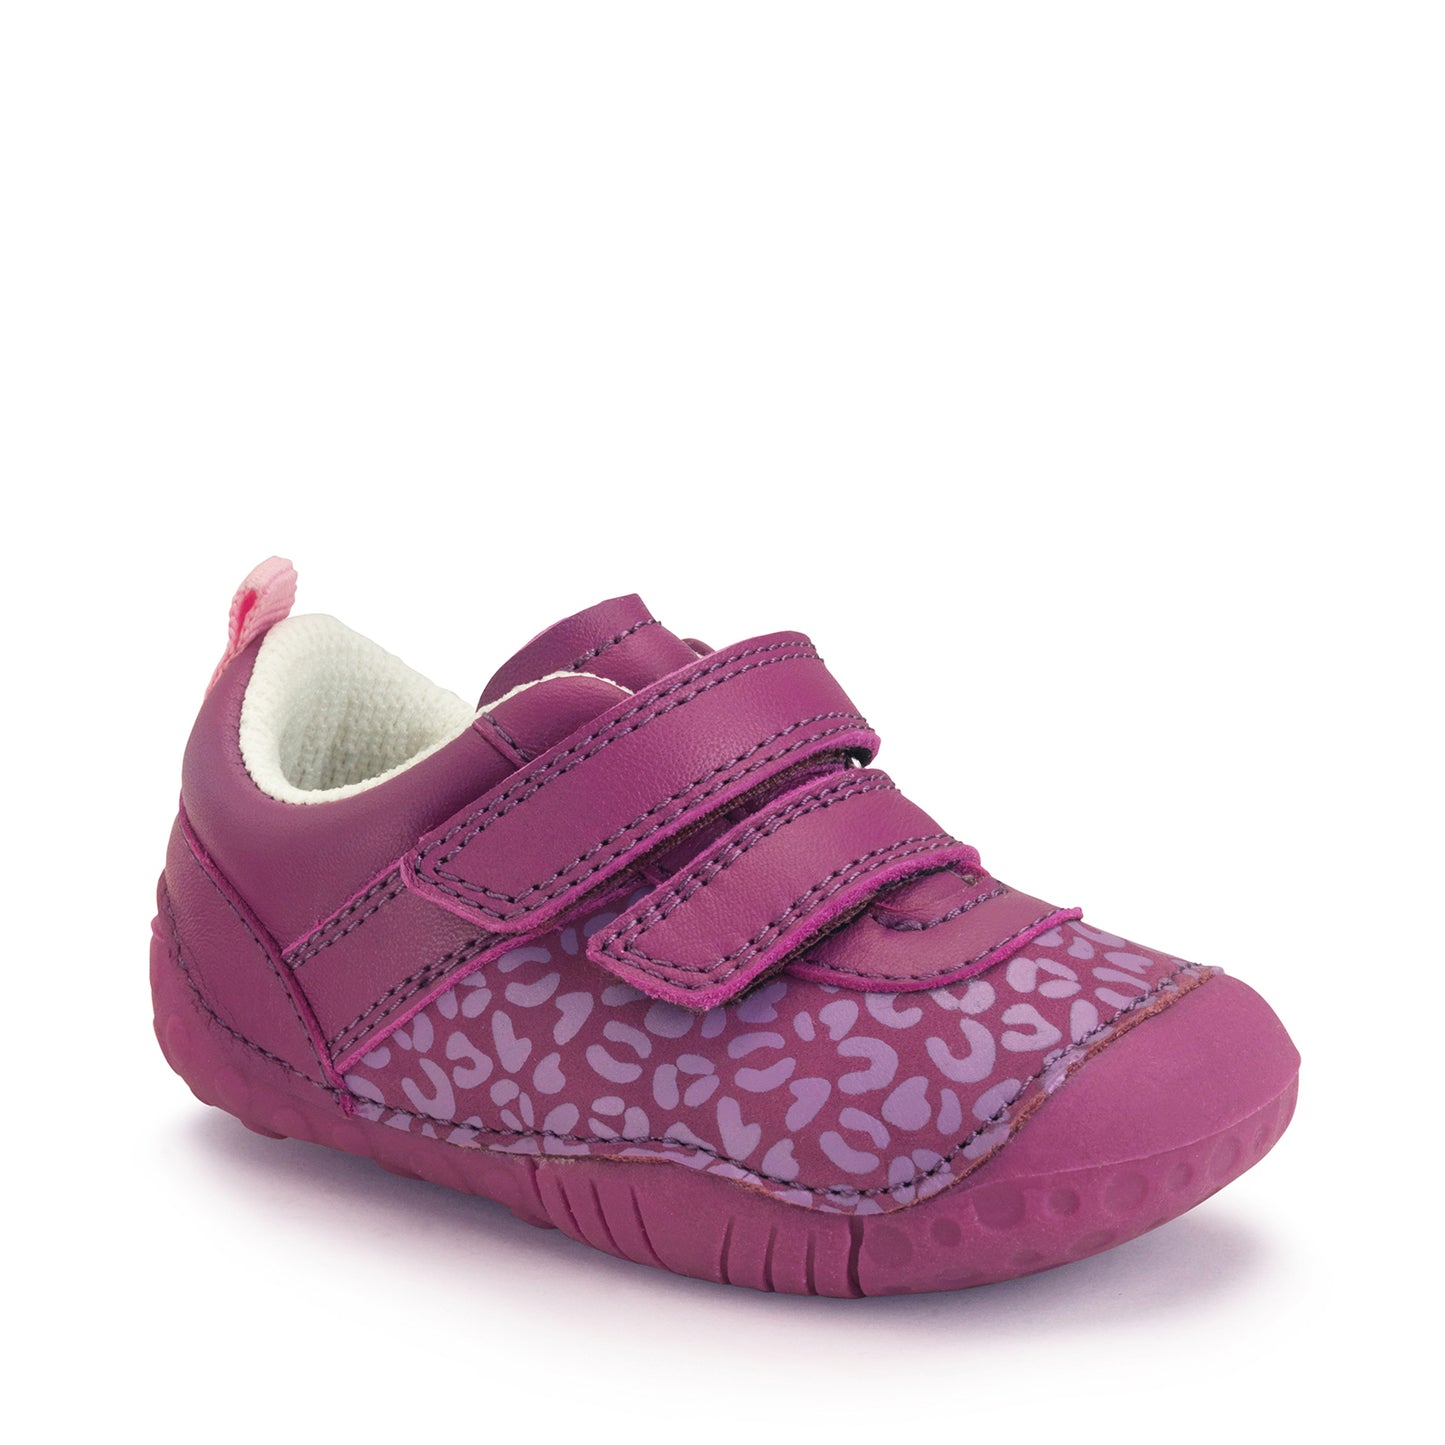 A girls pre-walker by Start-Rite, style Little Smile. In bright pink nubuck with leopard print detail. Double velcro fastening and toe bumper. Angled side view.